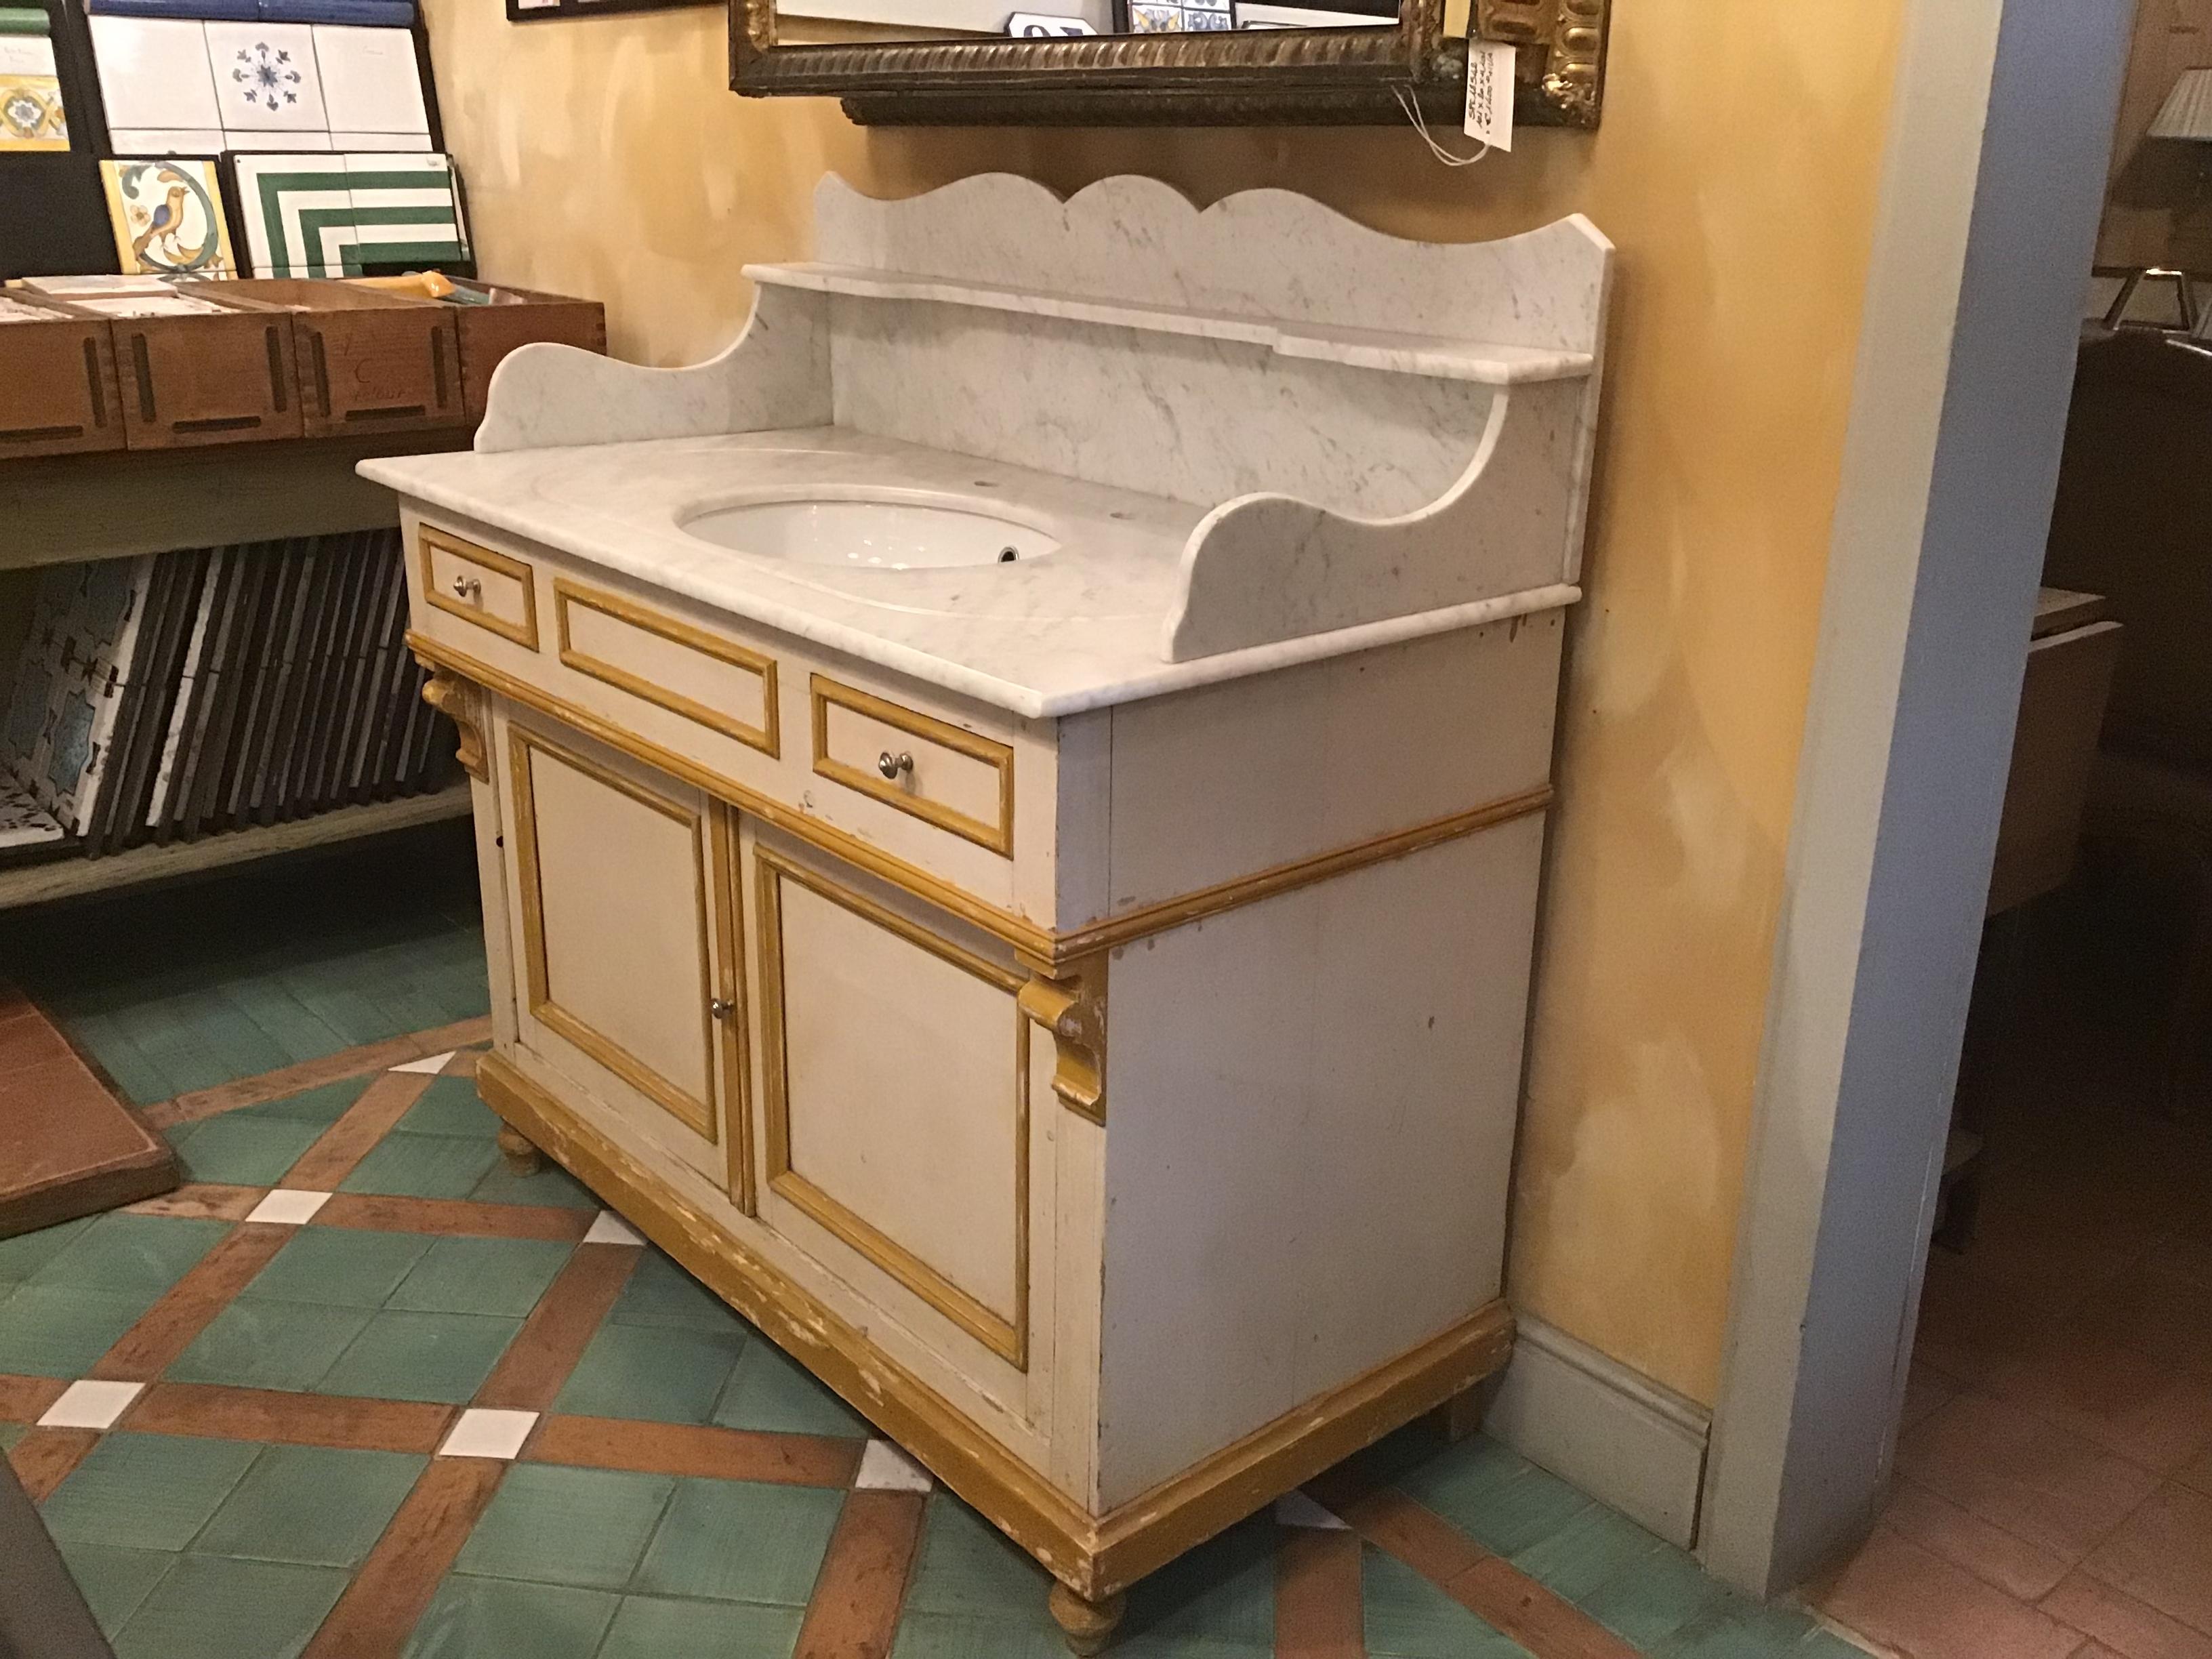 Victorian 19th Century Italian Painted Wood Cupboard Sink with Carrara Marble Top, 1890s